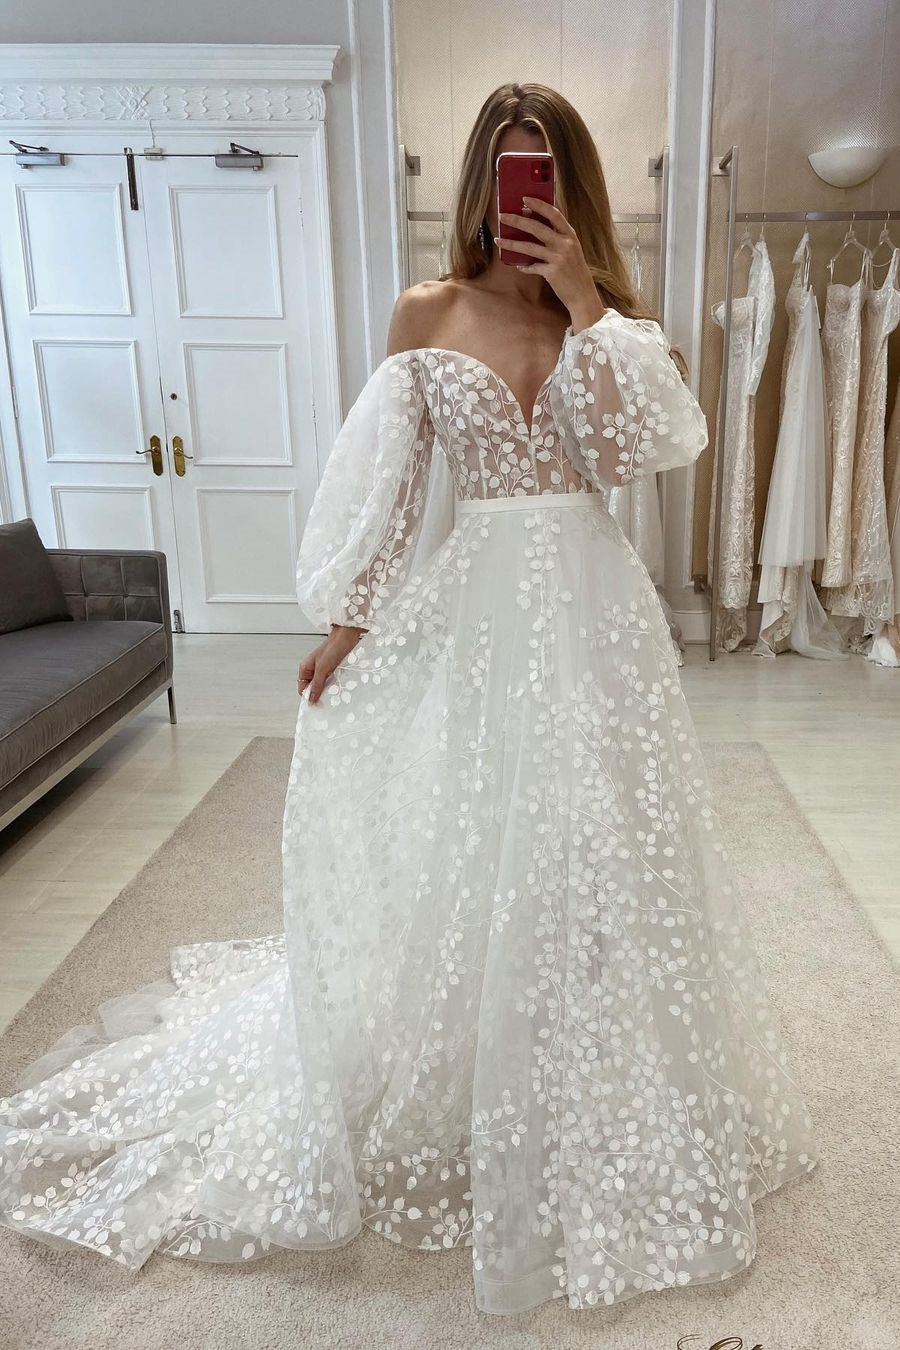 Suzhoufashion Gorgeous Off-the-Shoulder V-Neck Appliques Bridal Dresses With Long Sleeves